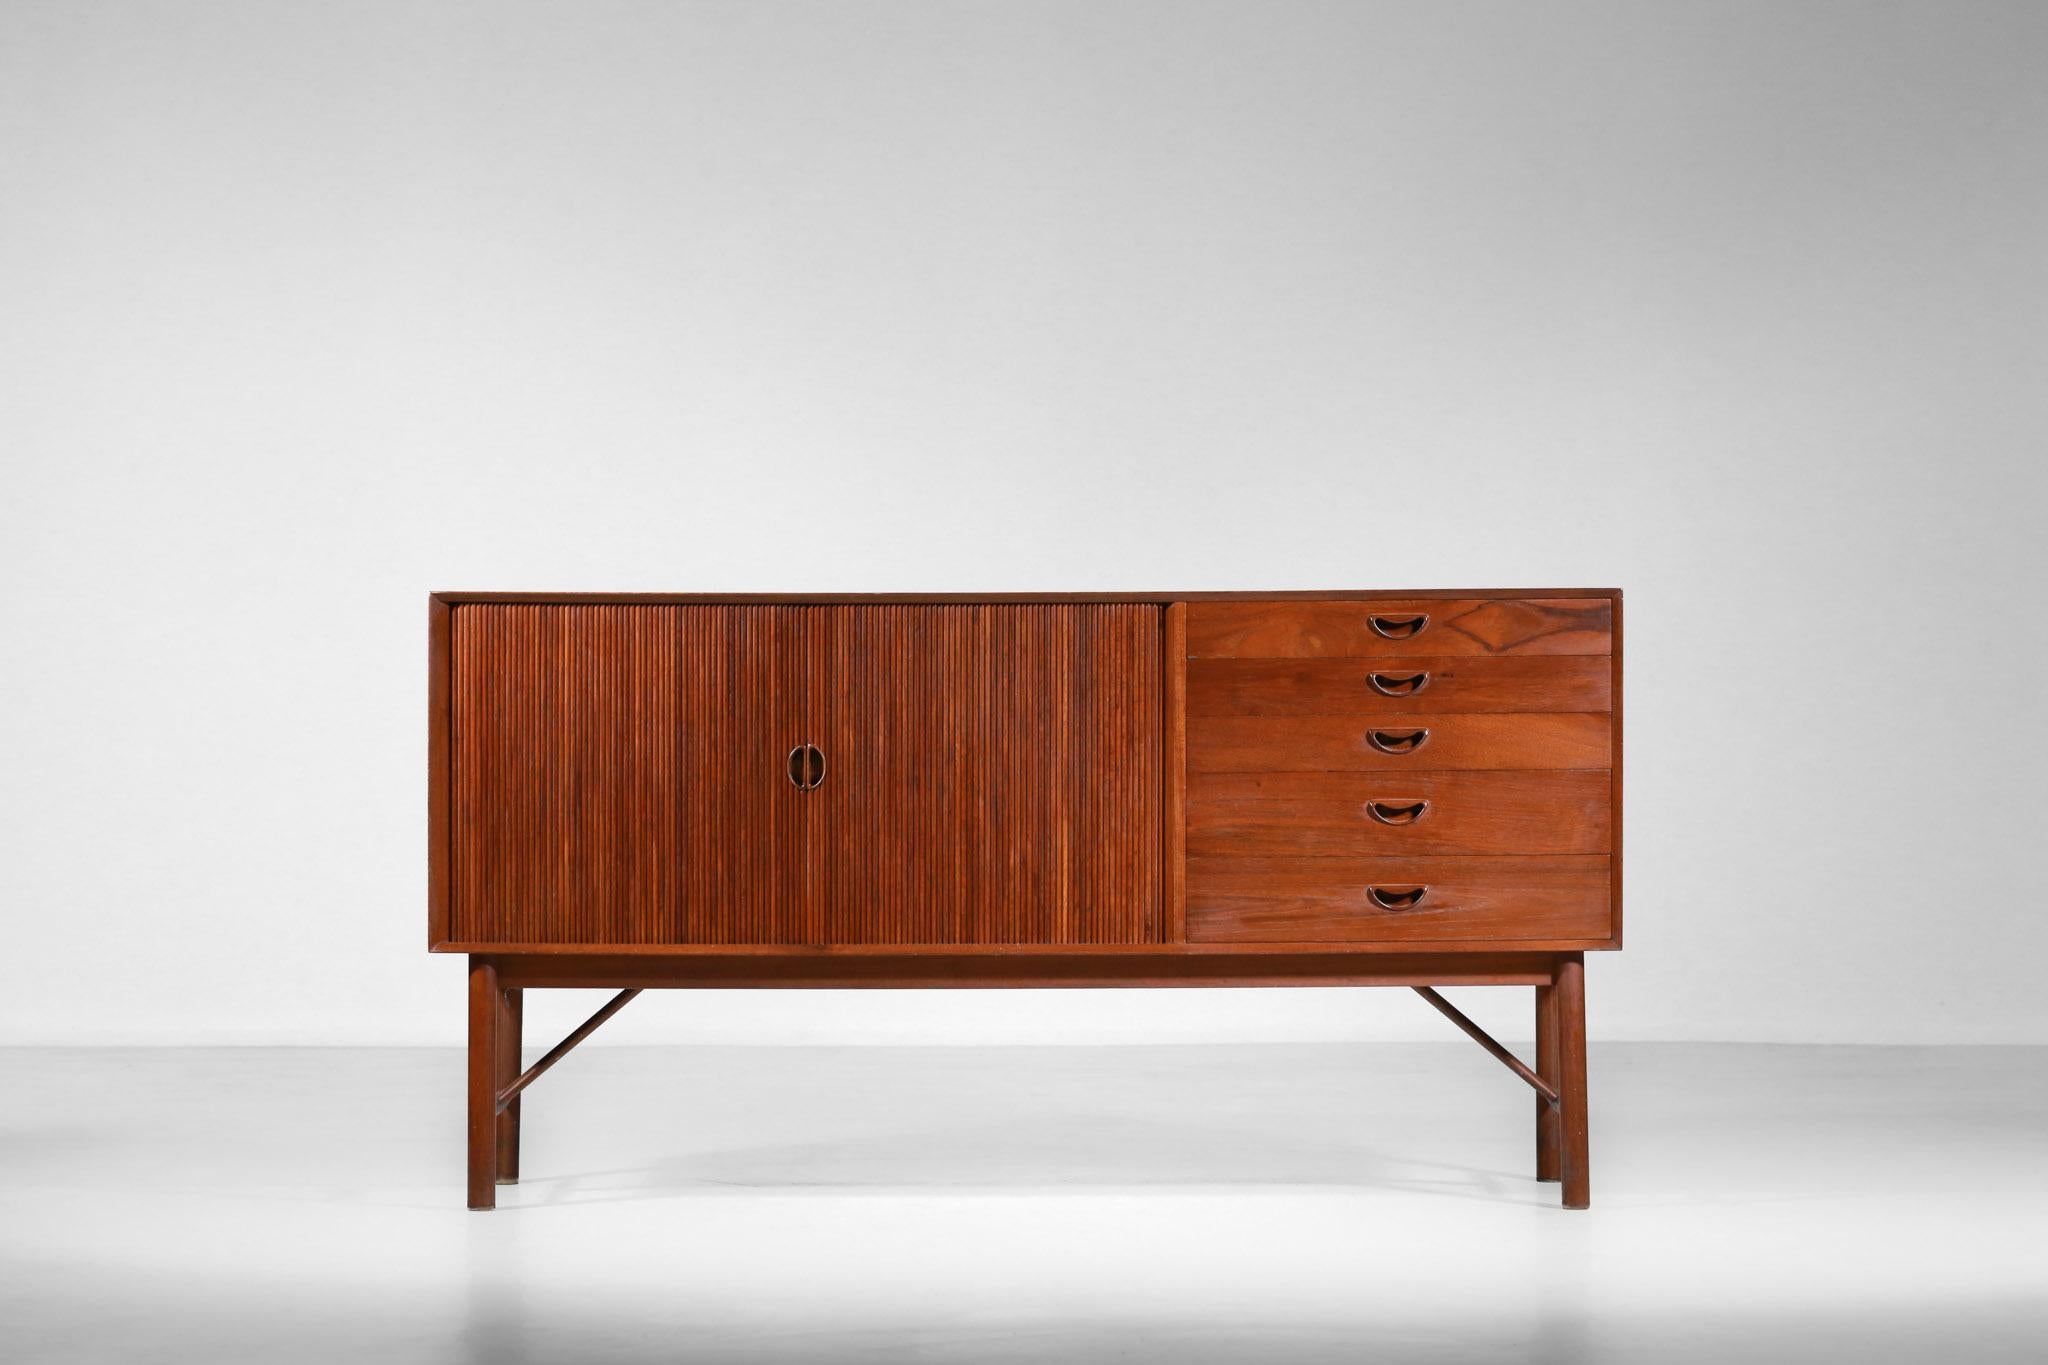 Danish sideboard from the 1960s designed by Scandinavian designers Peter Hvidt and Orla Molgaard.
Solid golden teak wood structure with a beautiful straight tail assembly.
This sideboard consists of a column of four drawers on the right-hand side